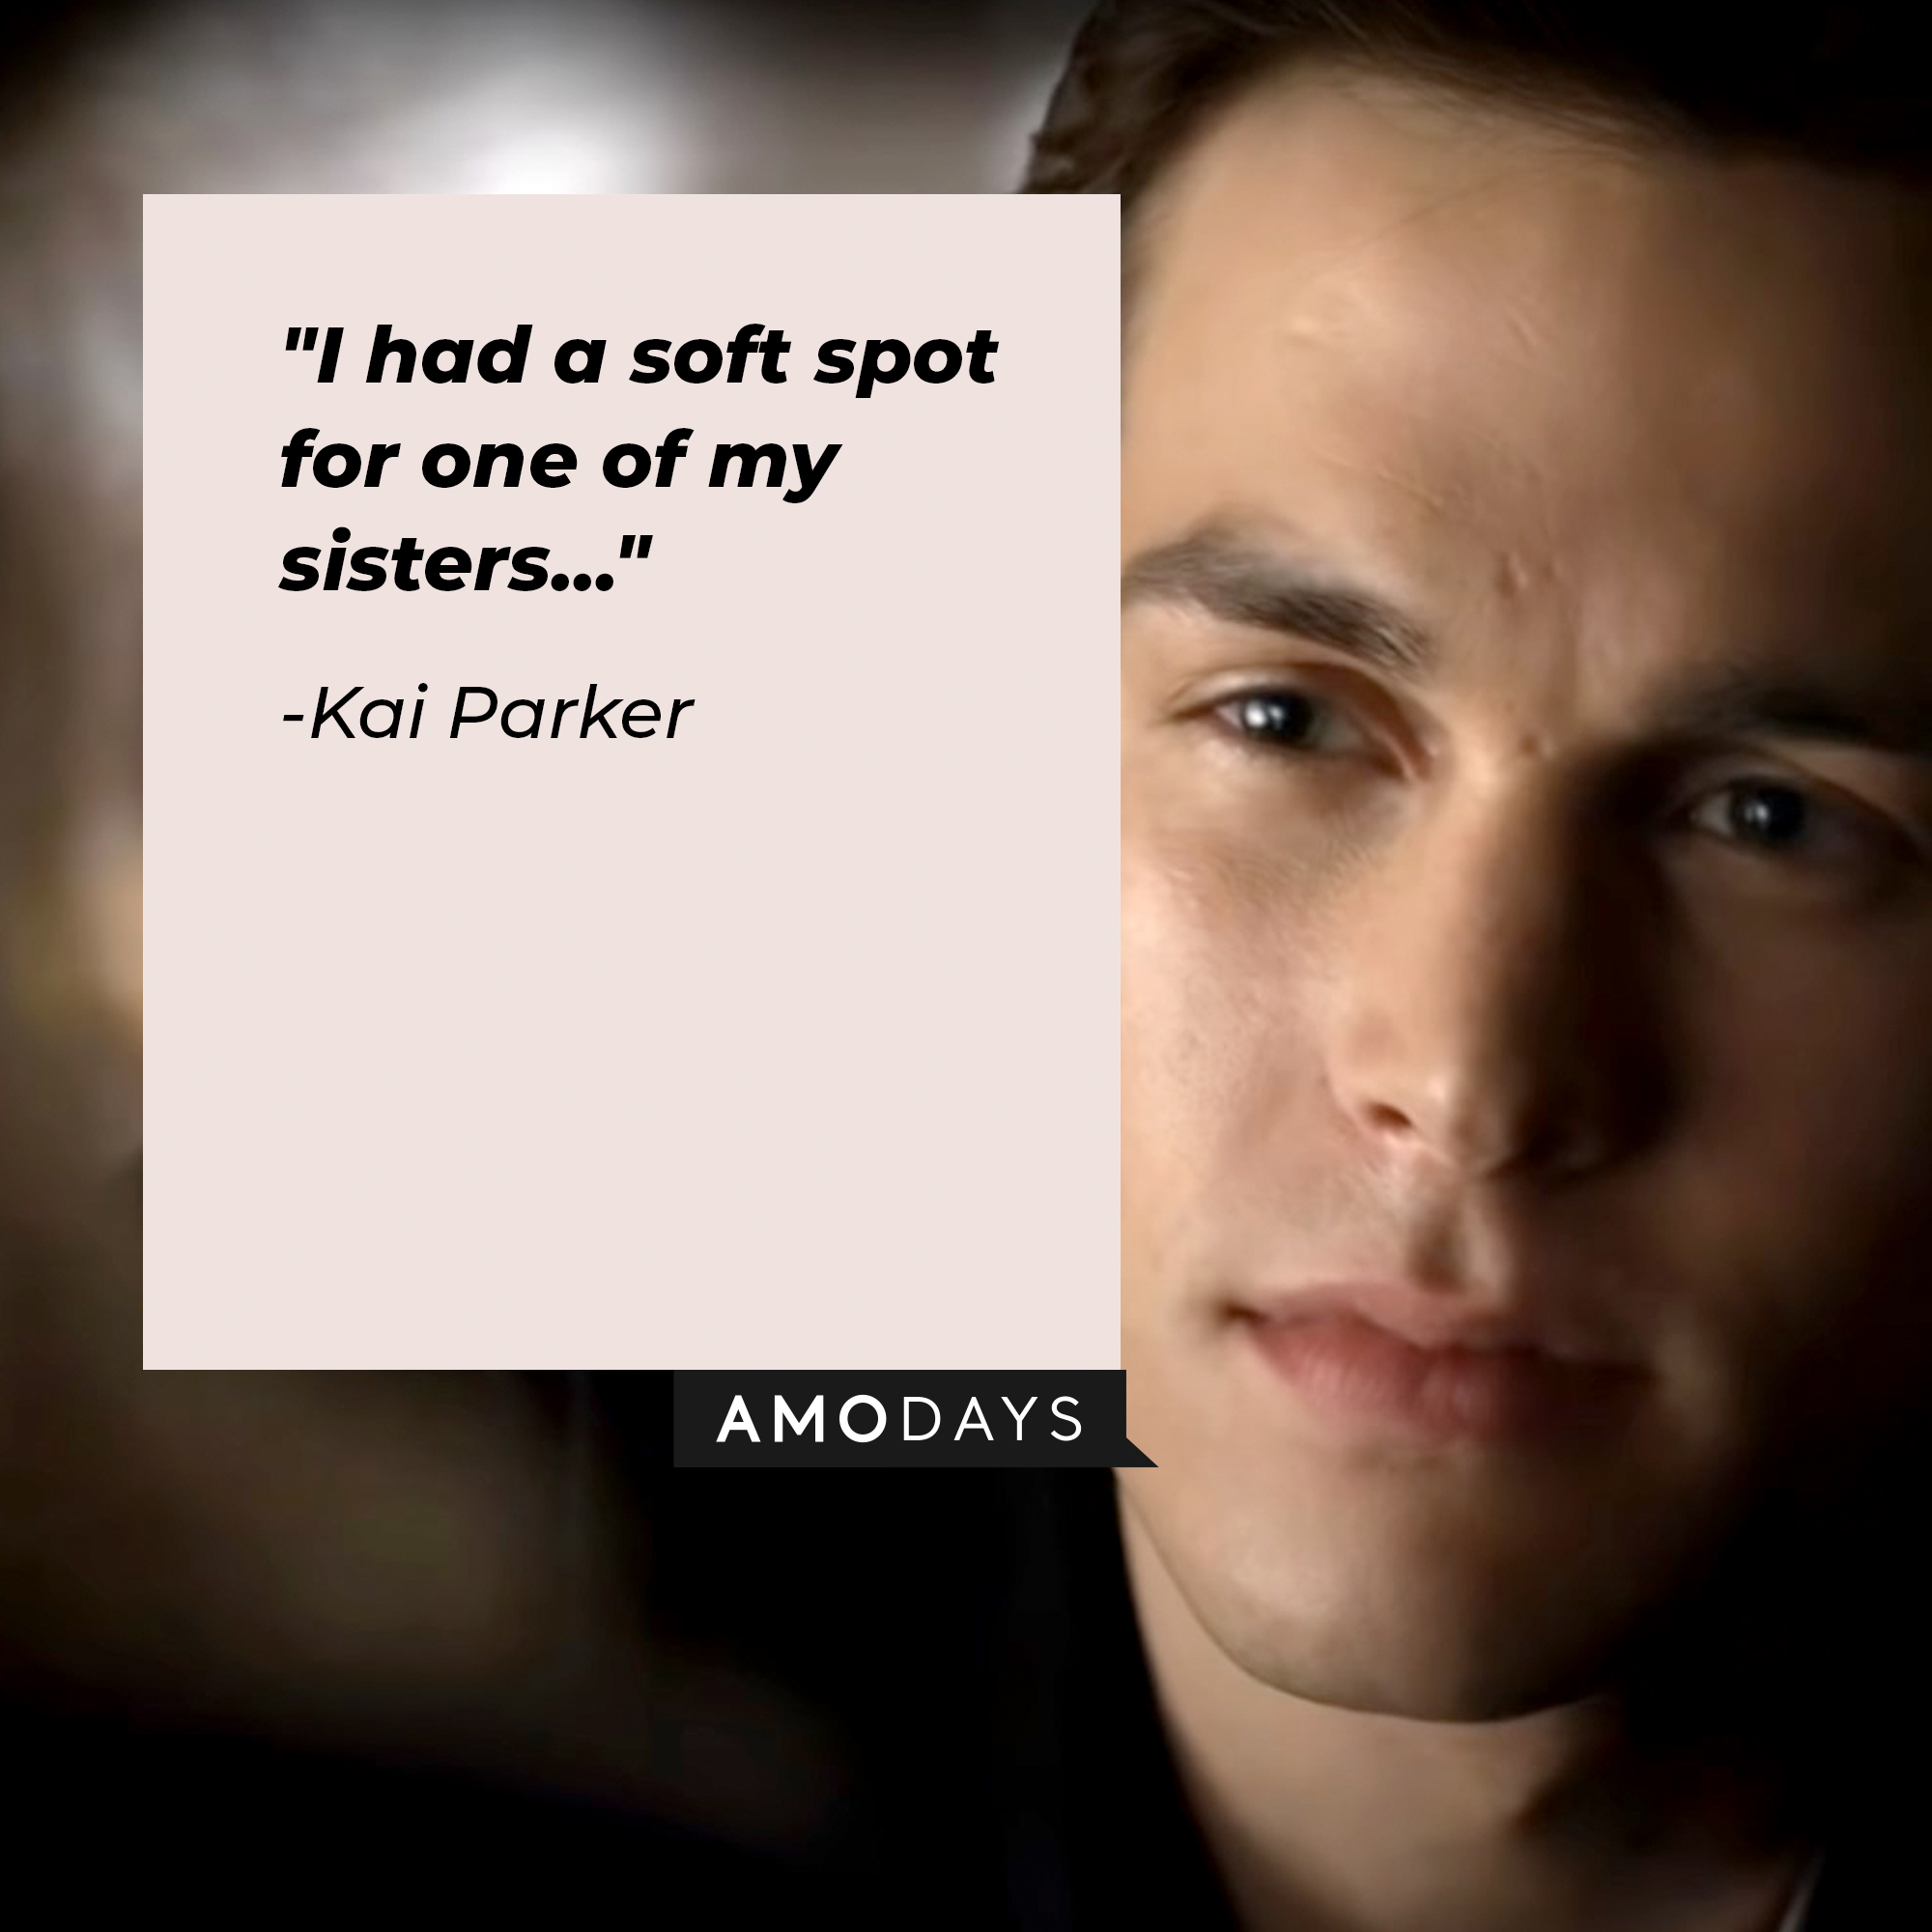 Kai Parker's quote: "I had a soft spot for one of my sisters..." | Source: Facebook.com/thevampirediaries